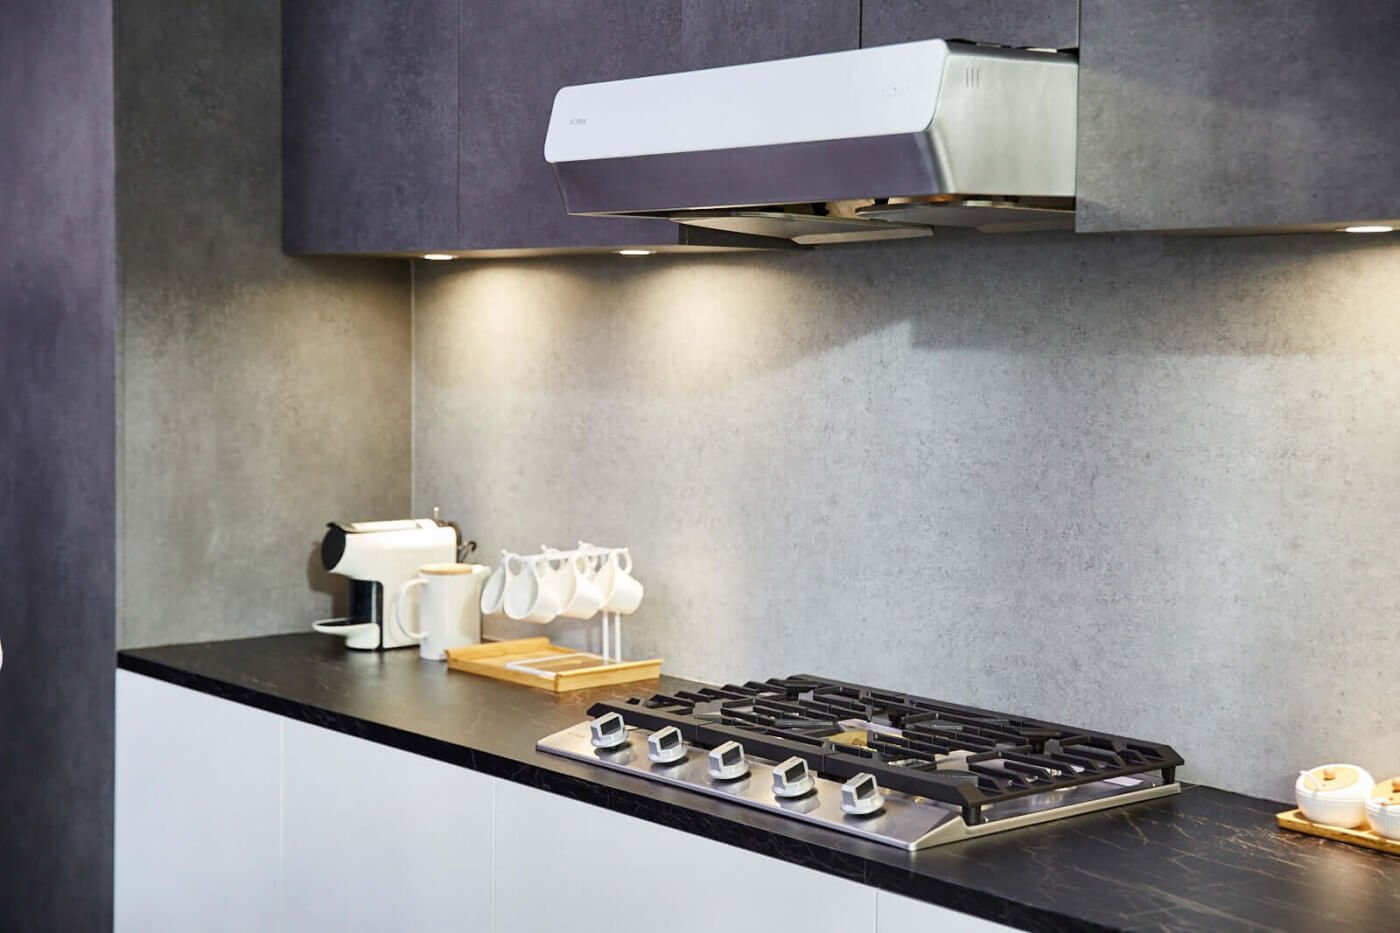 Sleek modern kitchen corner showcasing a Fotile Pixie Air Series Slim Line under cabinet range hood above a gas cooktop, with a minimalist coffee maker, white cups on a wooden holder, and small candles adding a homey touch to the monochromatic decor.